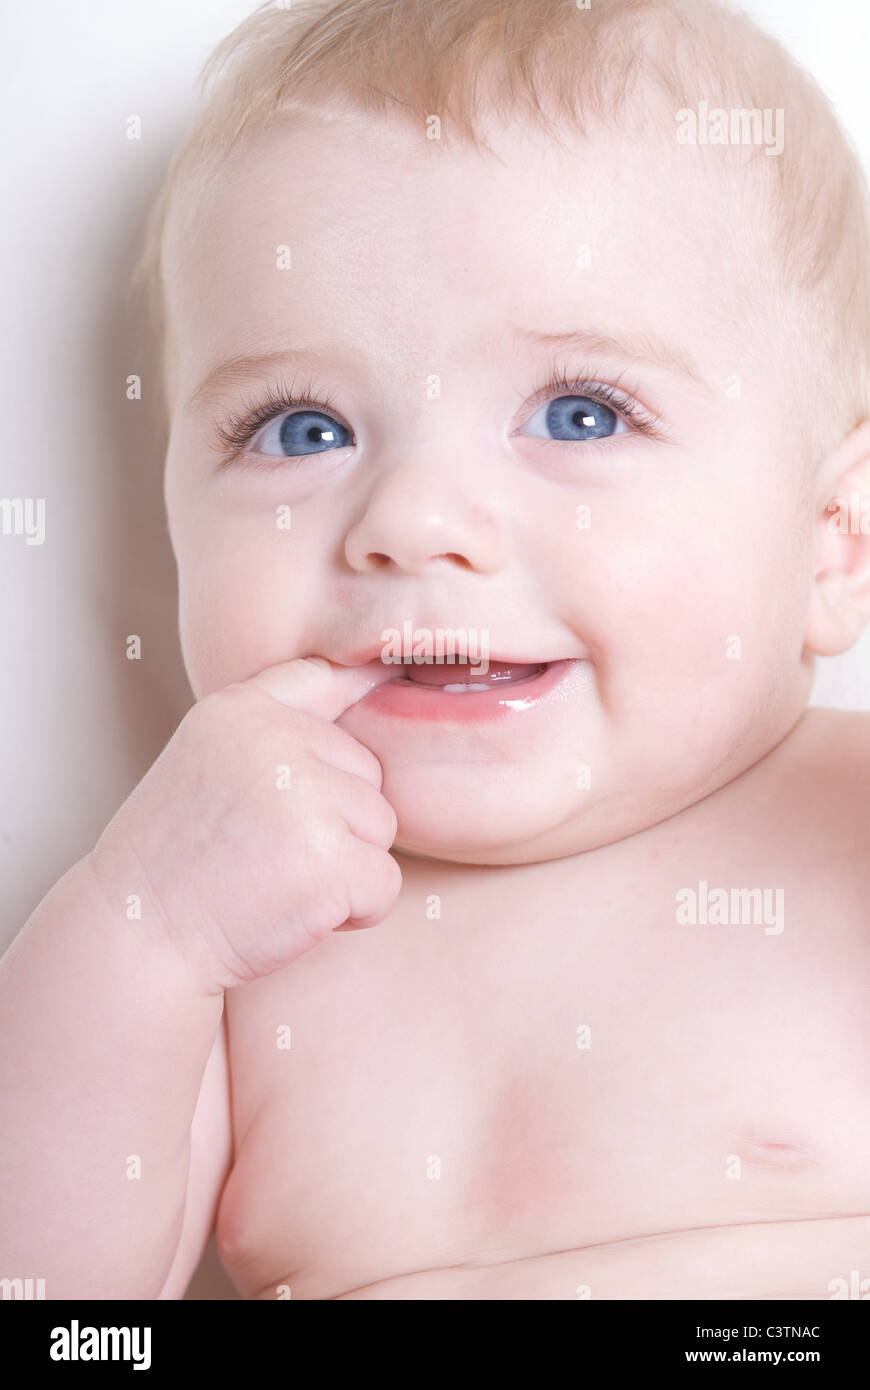 baby, 6 months, smiling, blue eyes Stock Photo